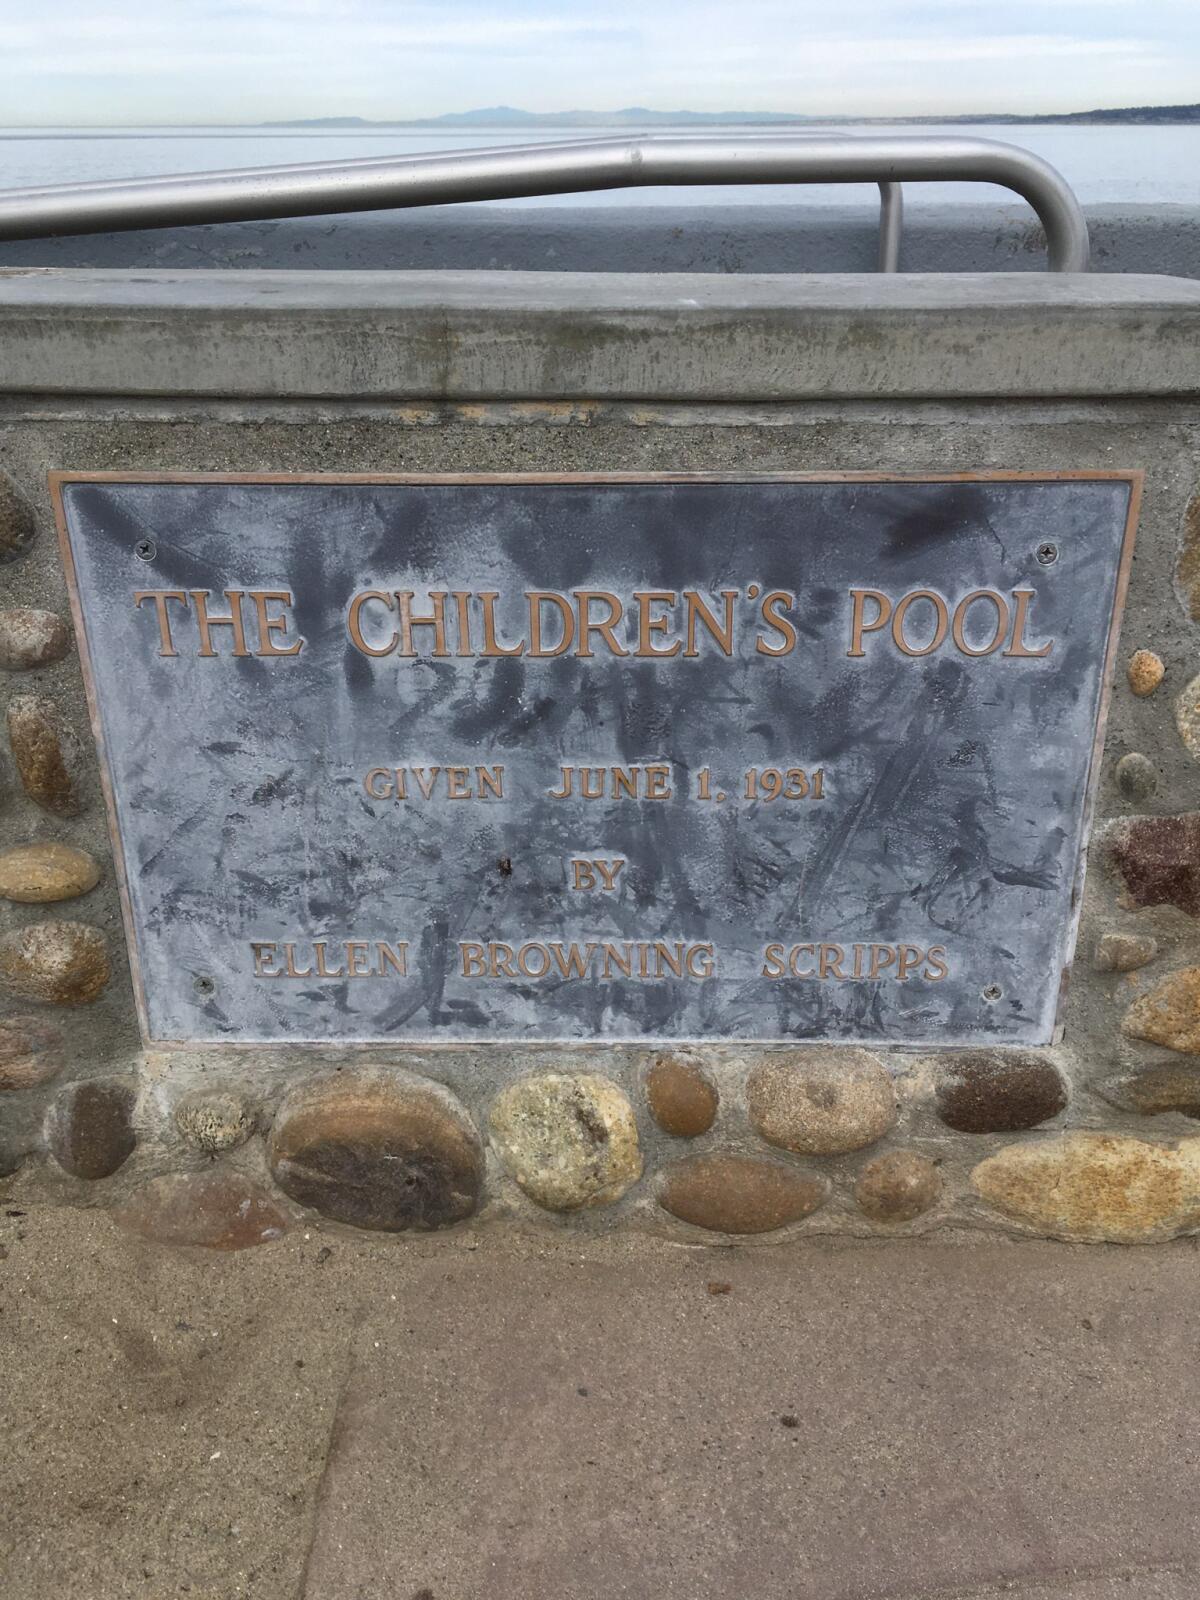 A discolored plaque at the Children's Pool in La Jolla is pictured before it was cleaned.